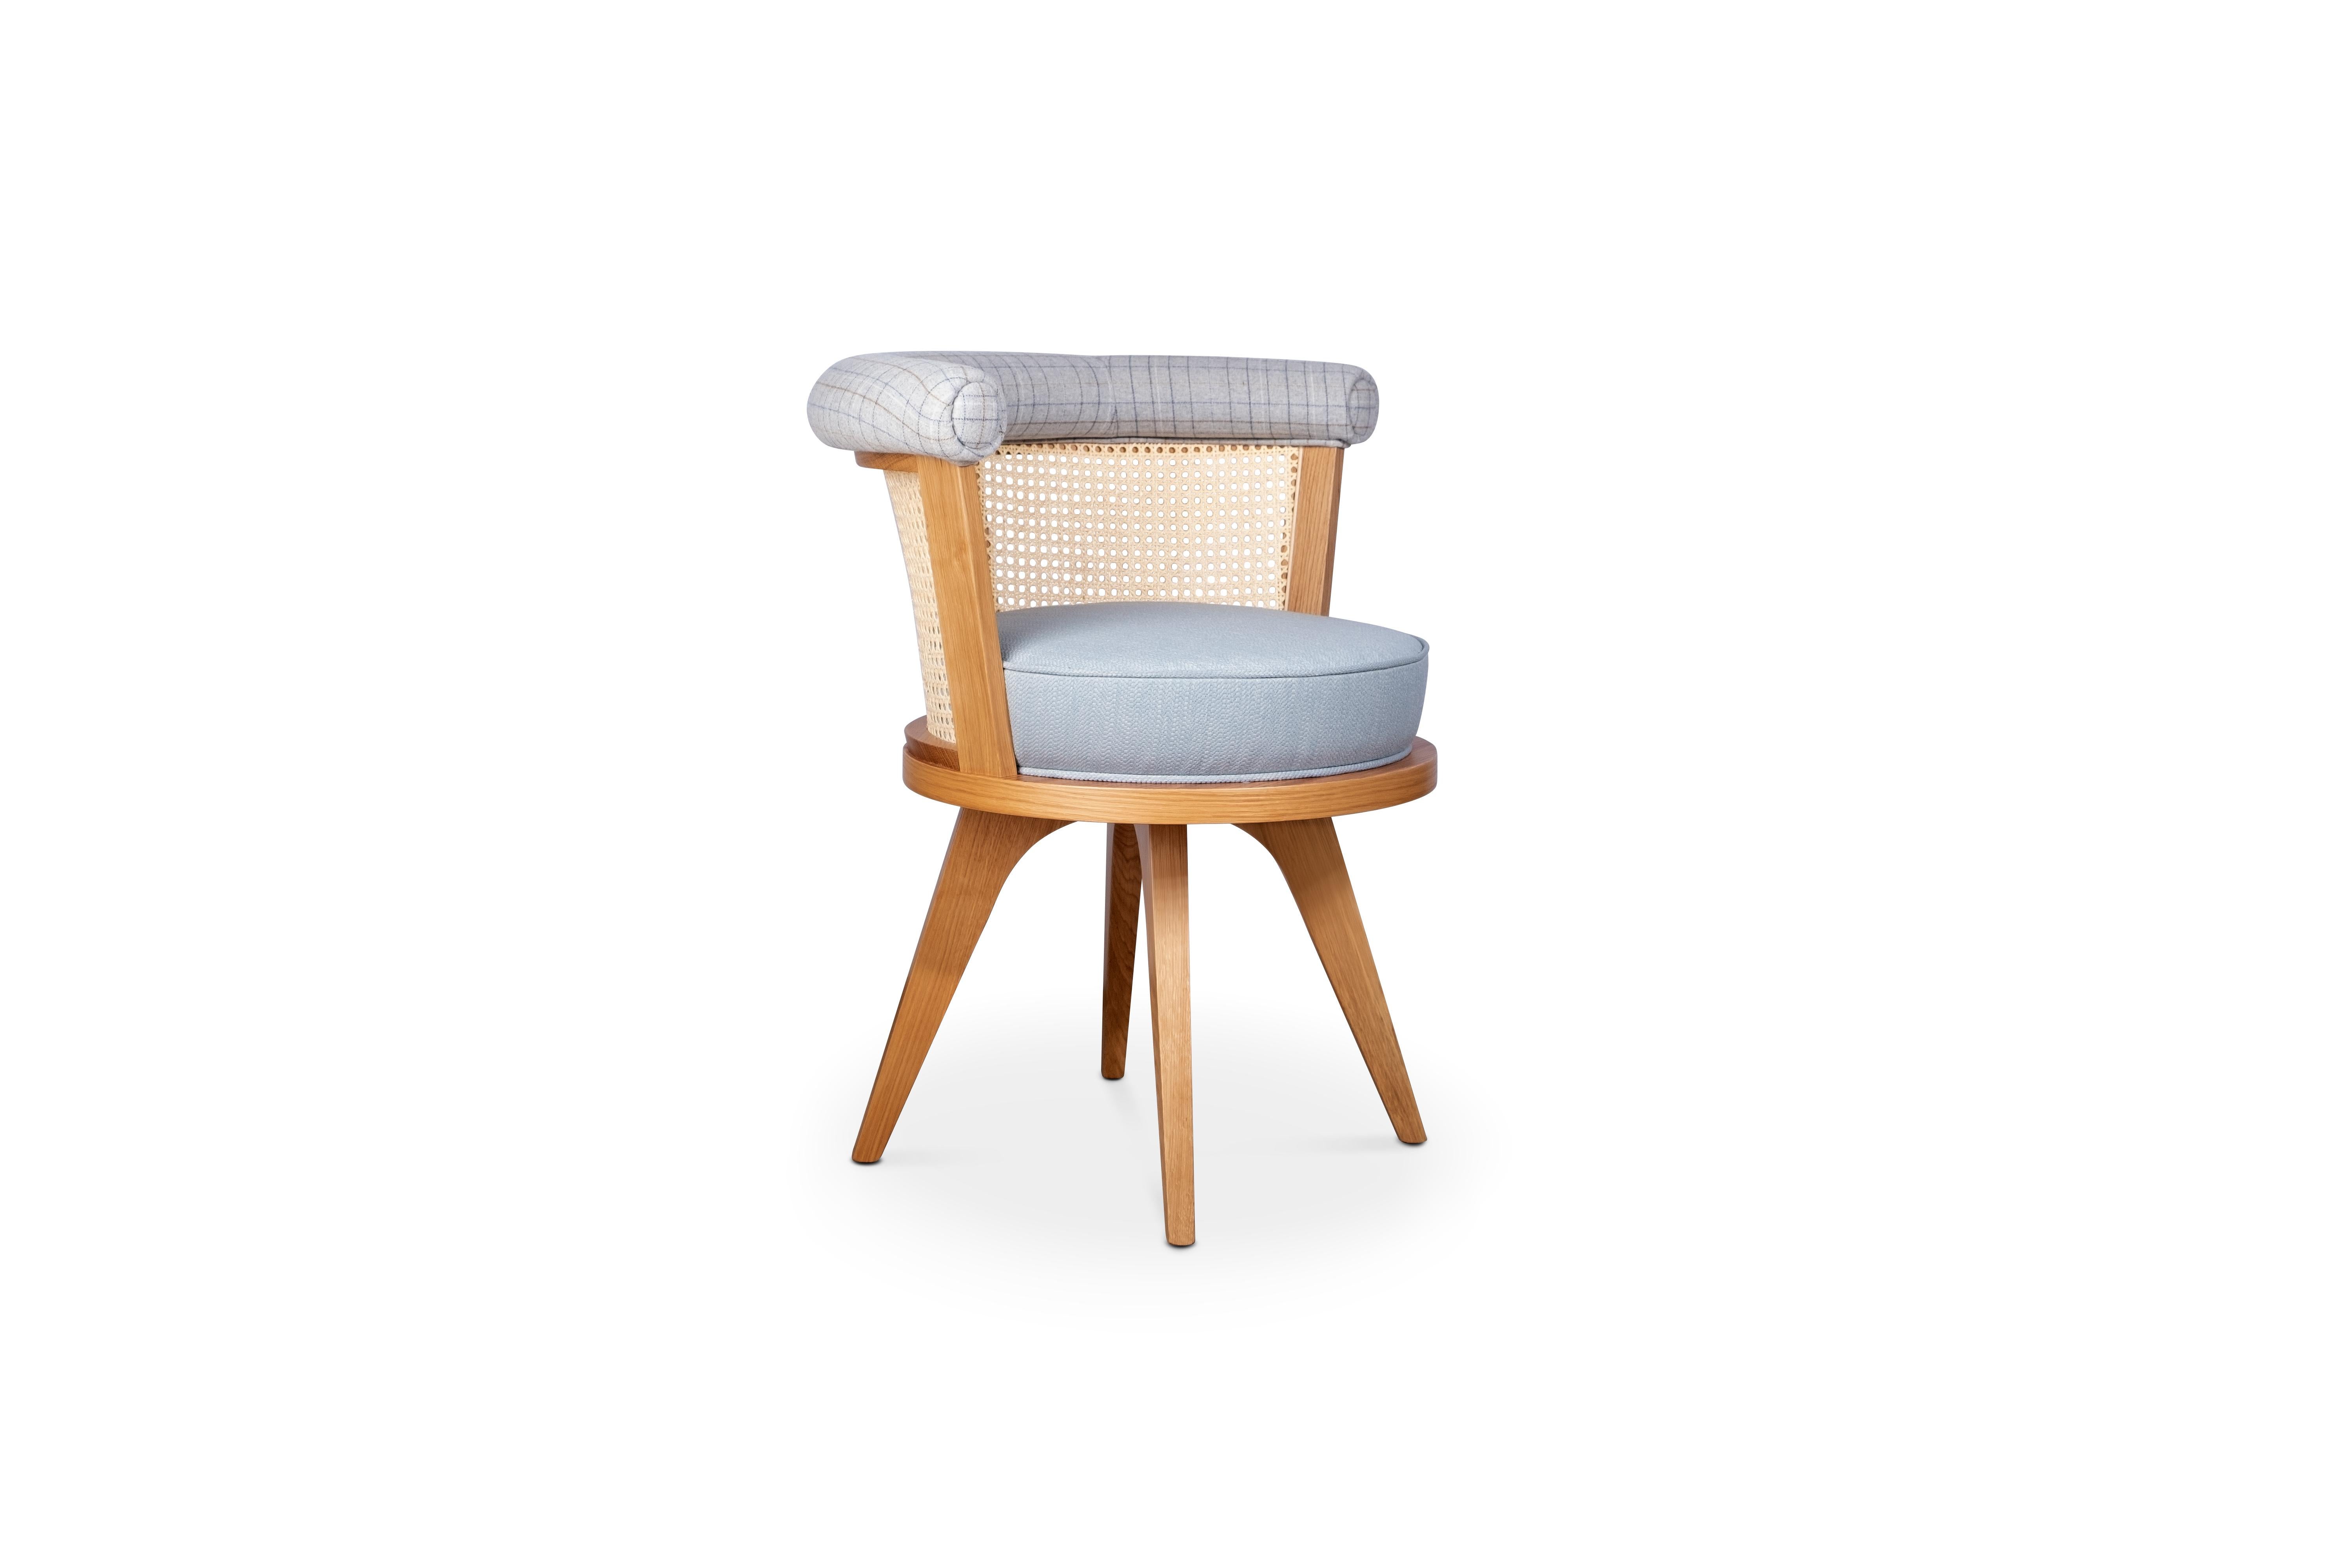 George is one of the wood tailors club's bestsellers.

A membership application in a privileged club sometimes requires an endorsement by at least one club member. So, inspired in the symbolism of the act, George Dining Chair takes the name of King